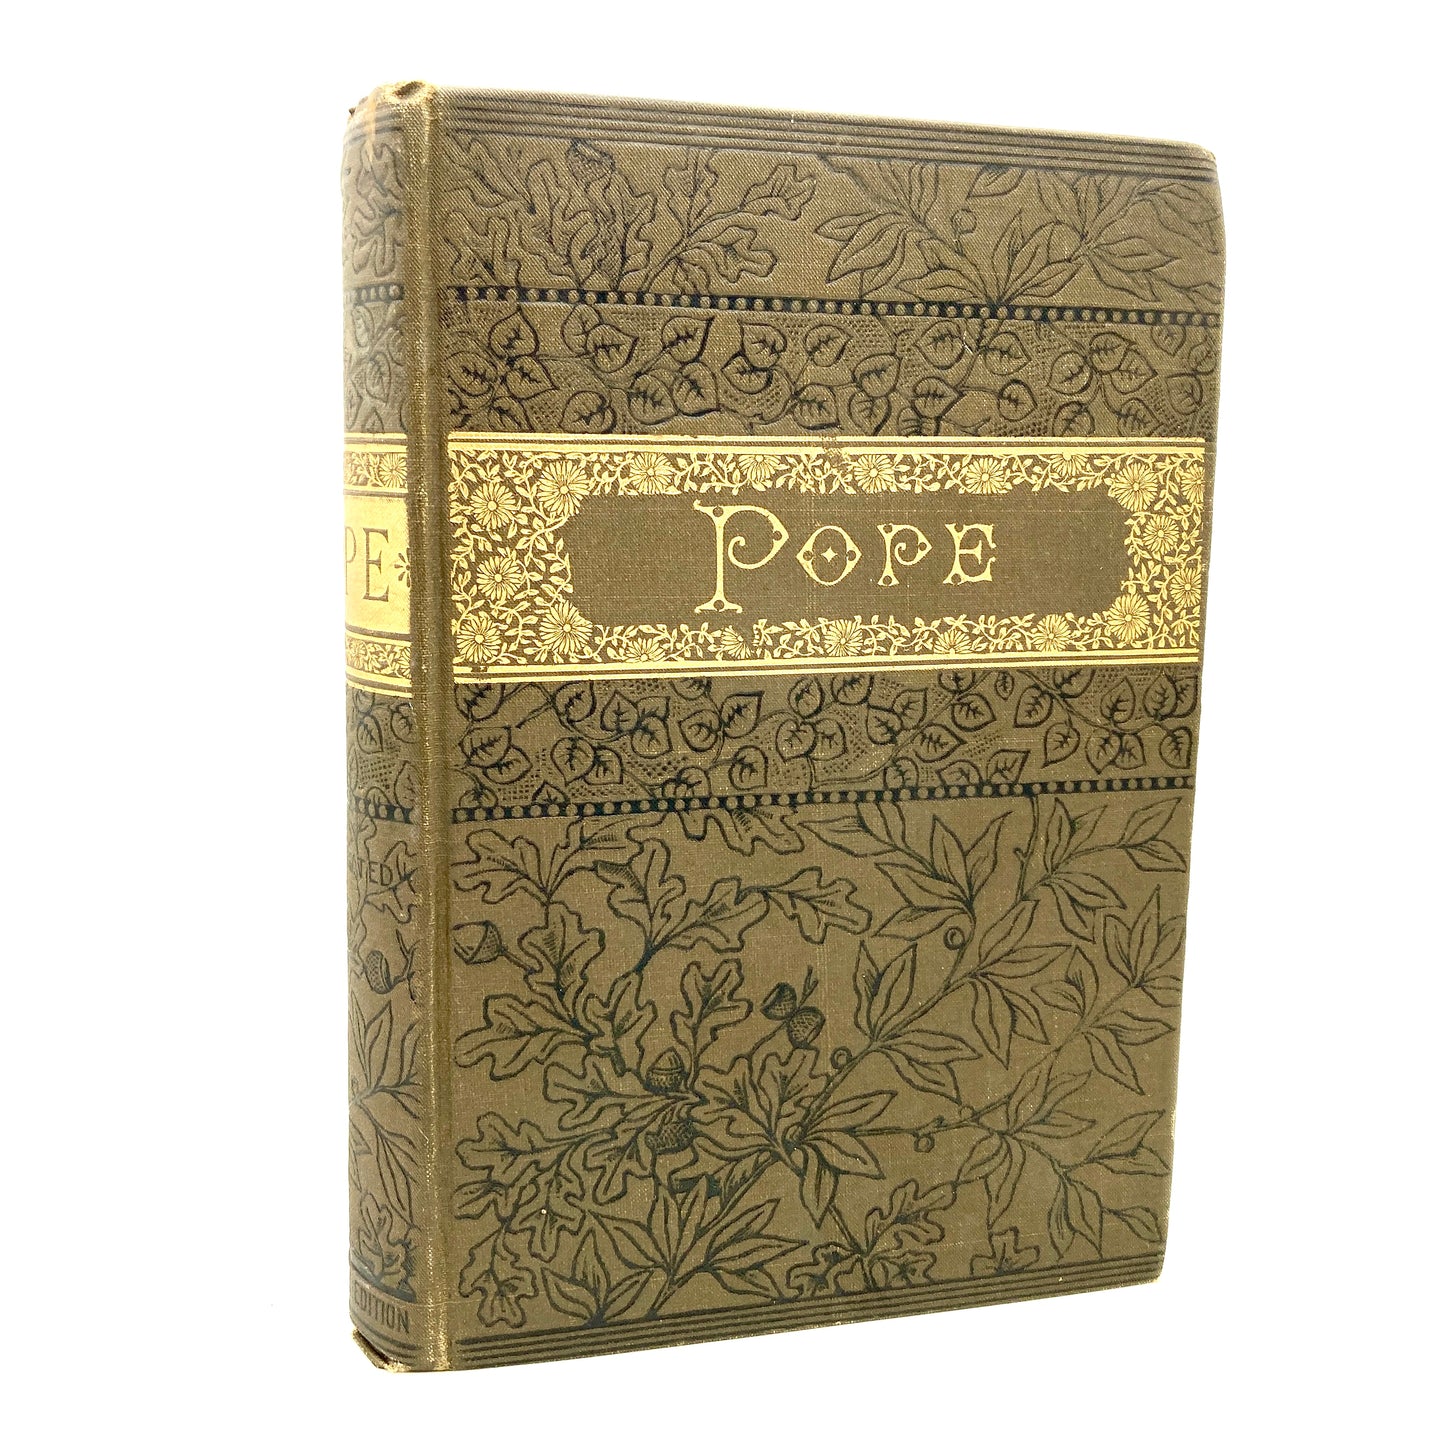 POPE, Alexander "The Poetical Works" [The American News Company, c1880s] - Buzz Bookstore